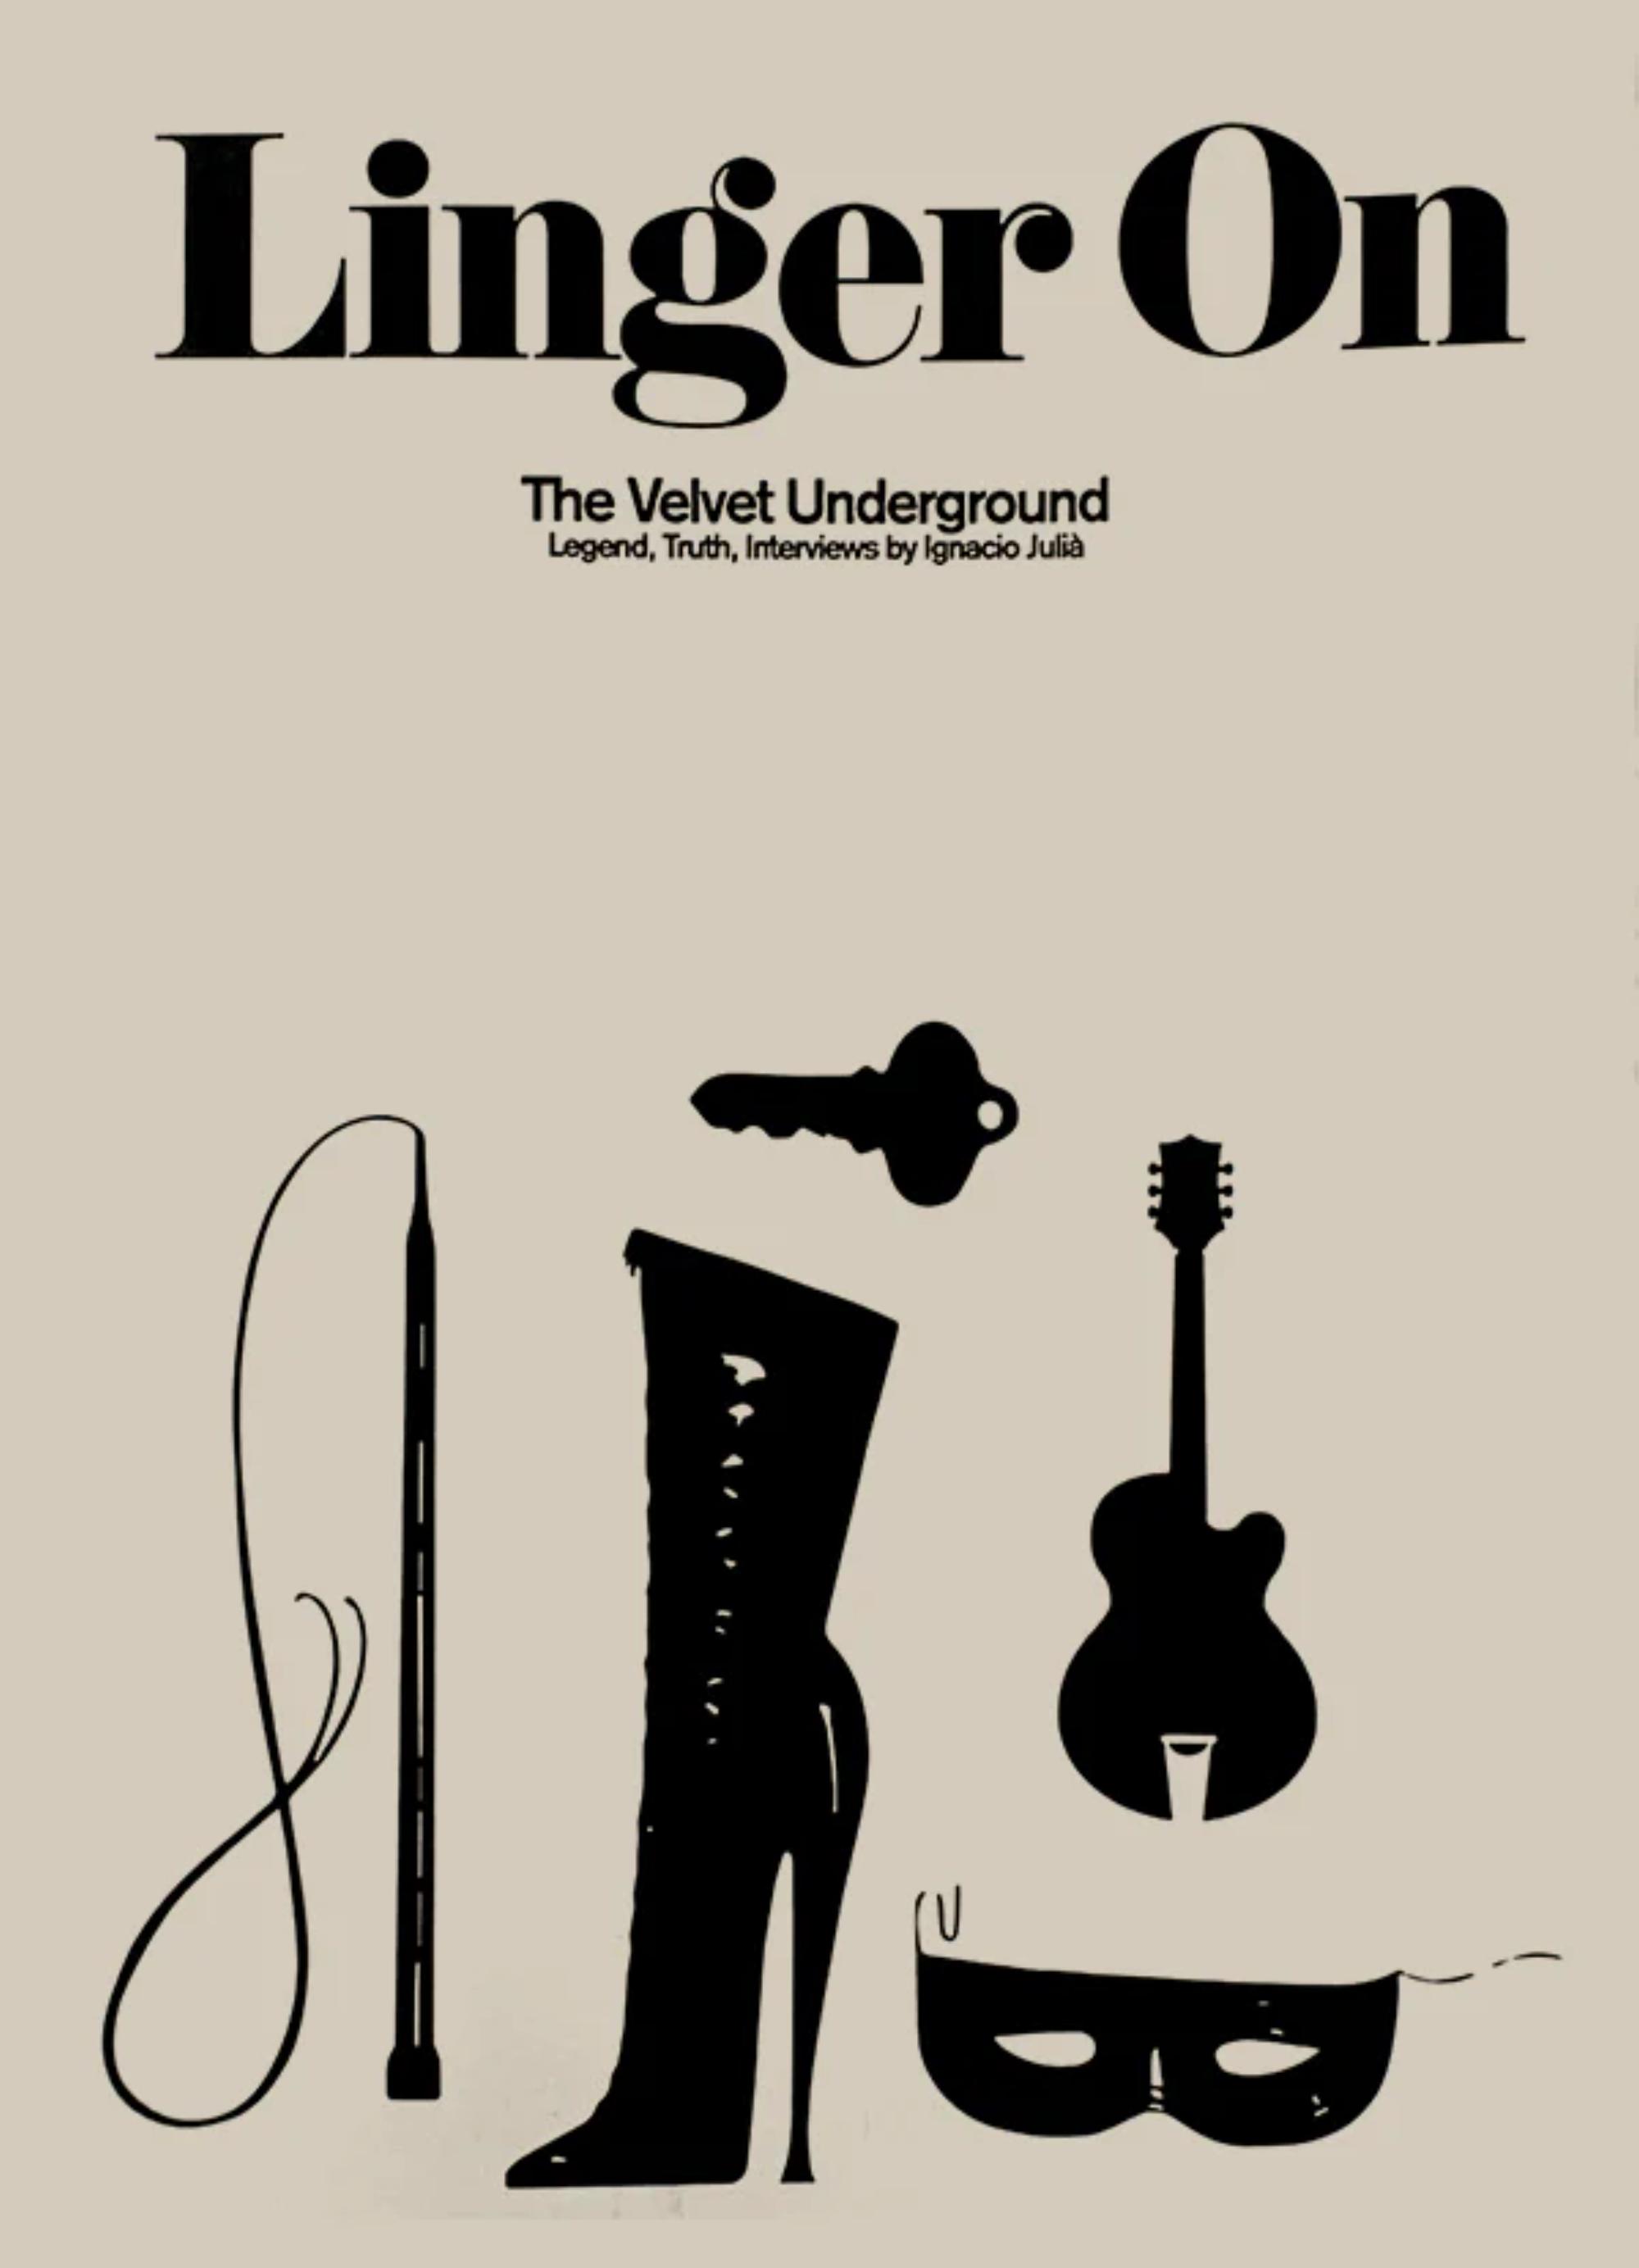 Beige book cover with black icons of a heeled boot, a mask, a guitar, a key, and a whip